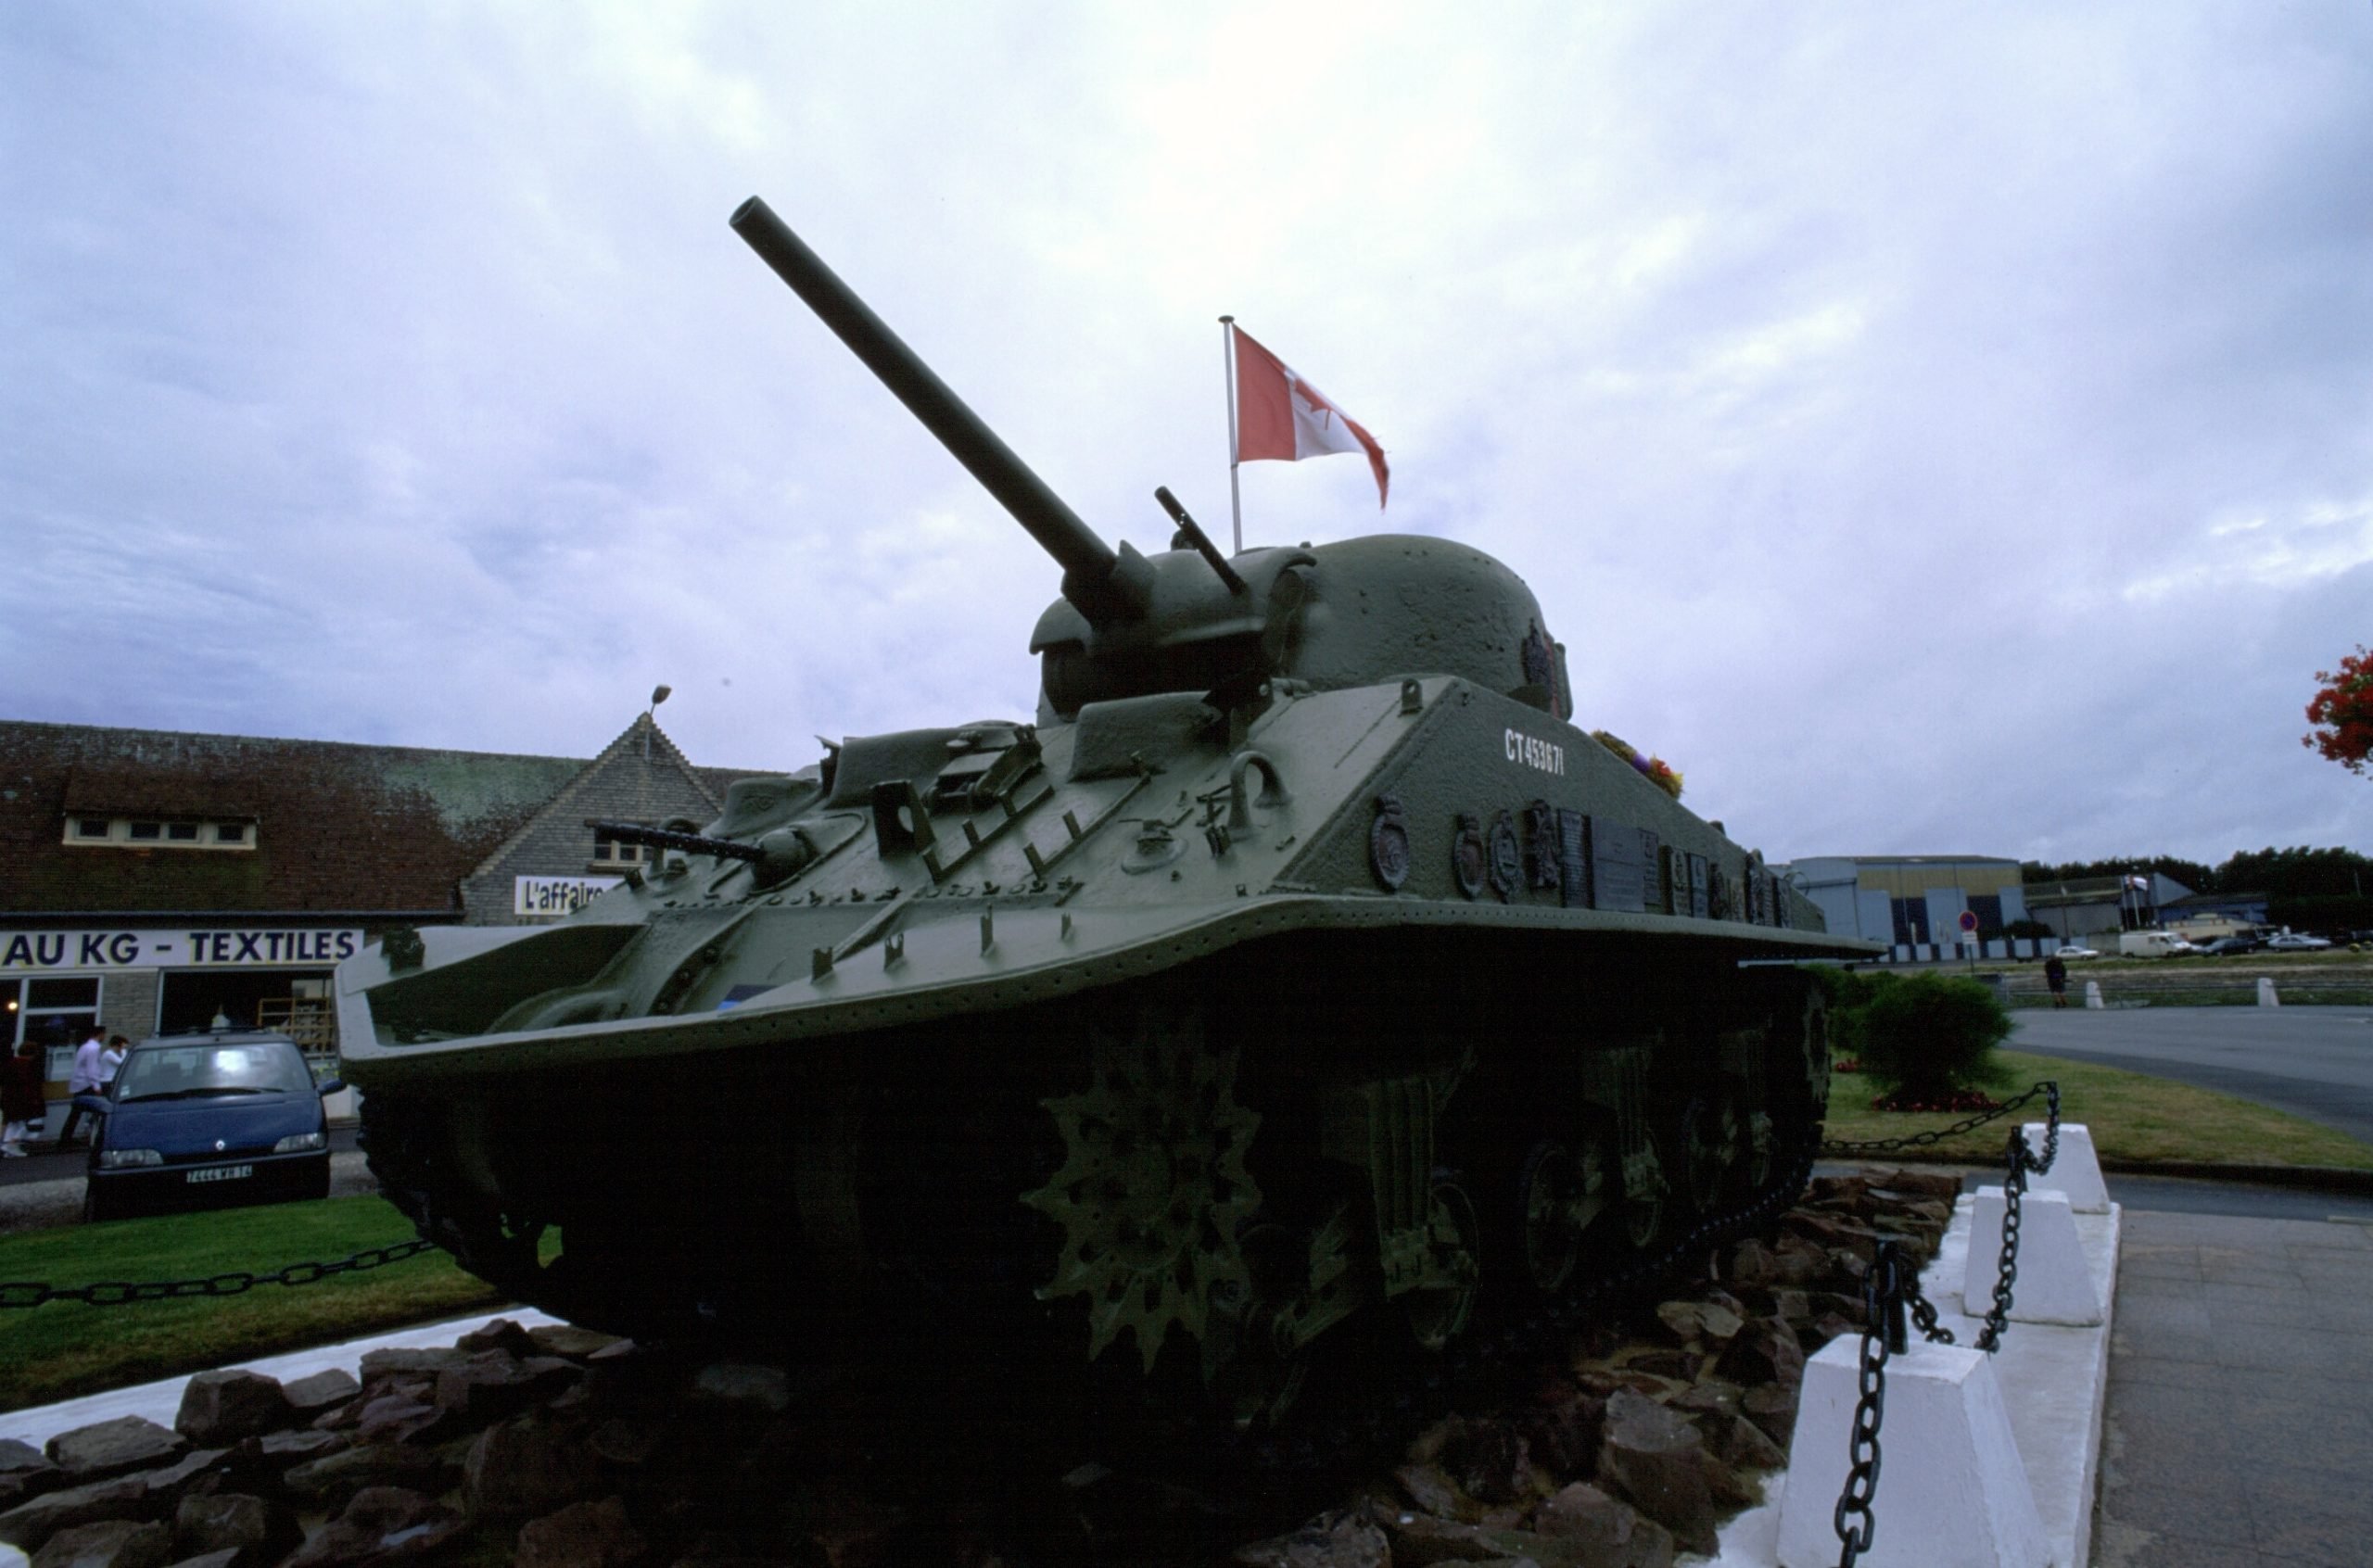 A photo of a Sherman Tank, on perm display at Juno Beach in remembrance of the Canadian Forces